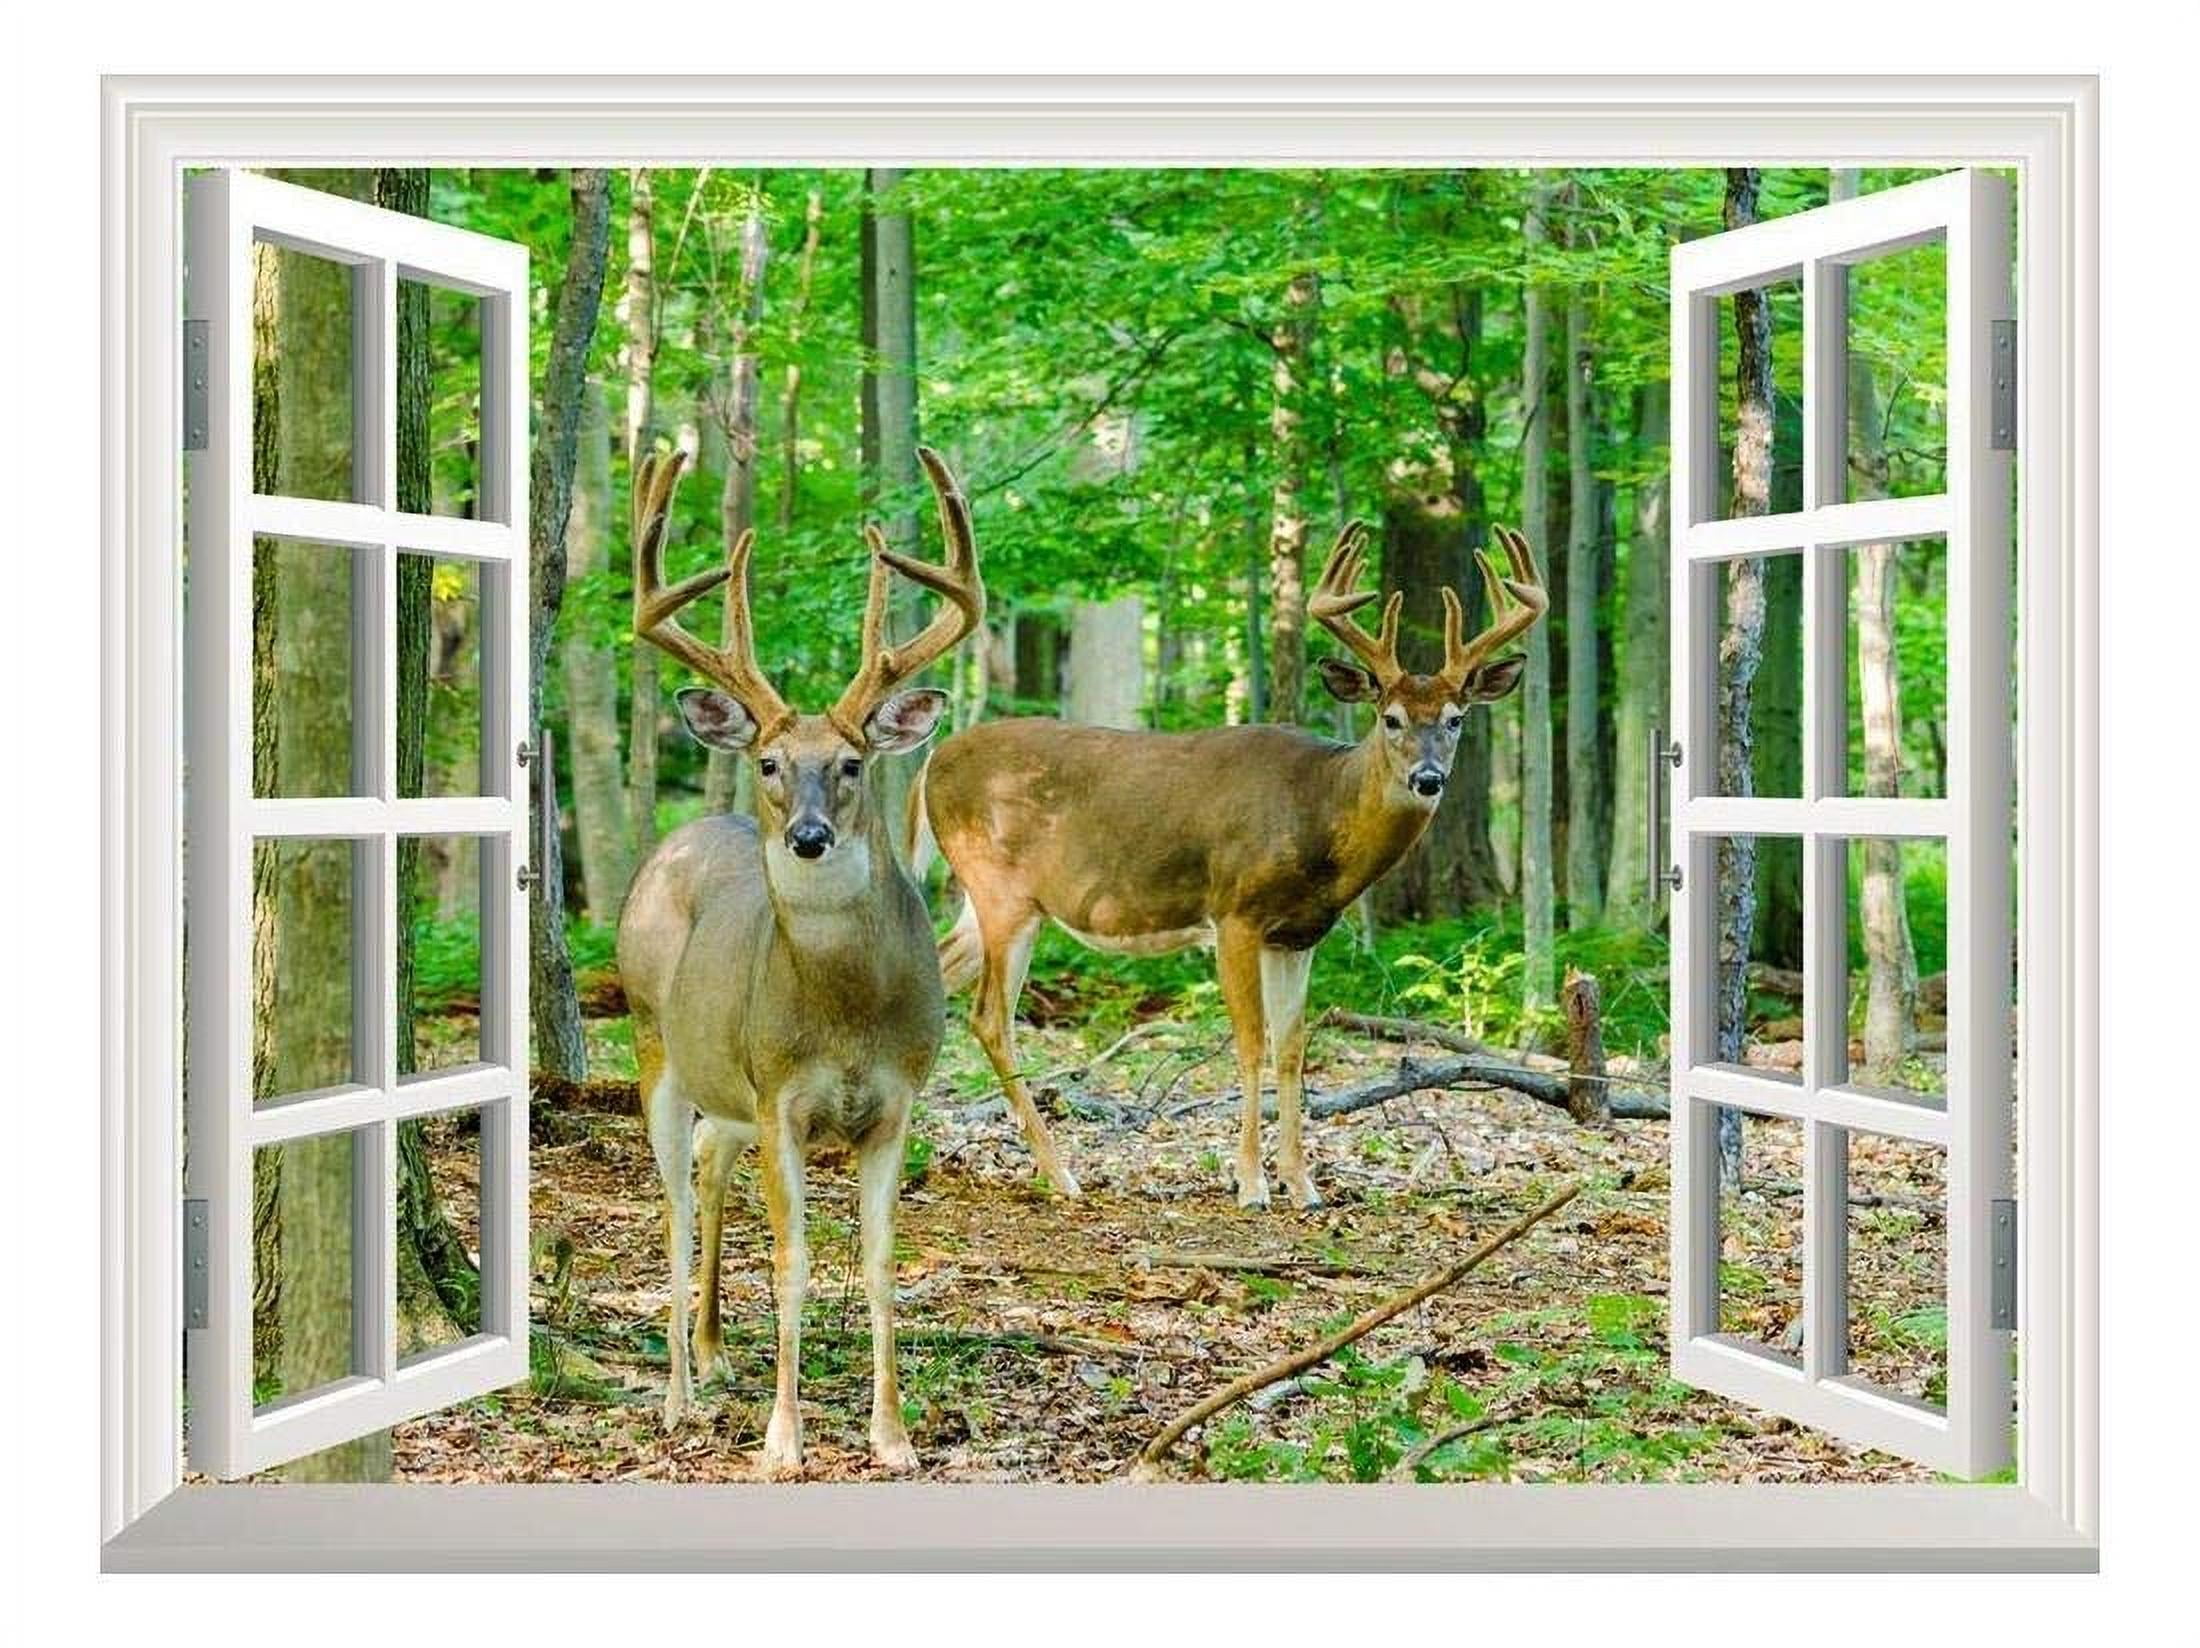 Forest Deer Wall Stickers 3D Wall Decals Poster Mural Living Room Home Deco UV 